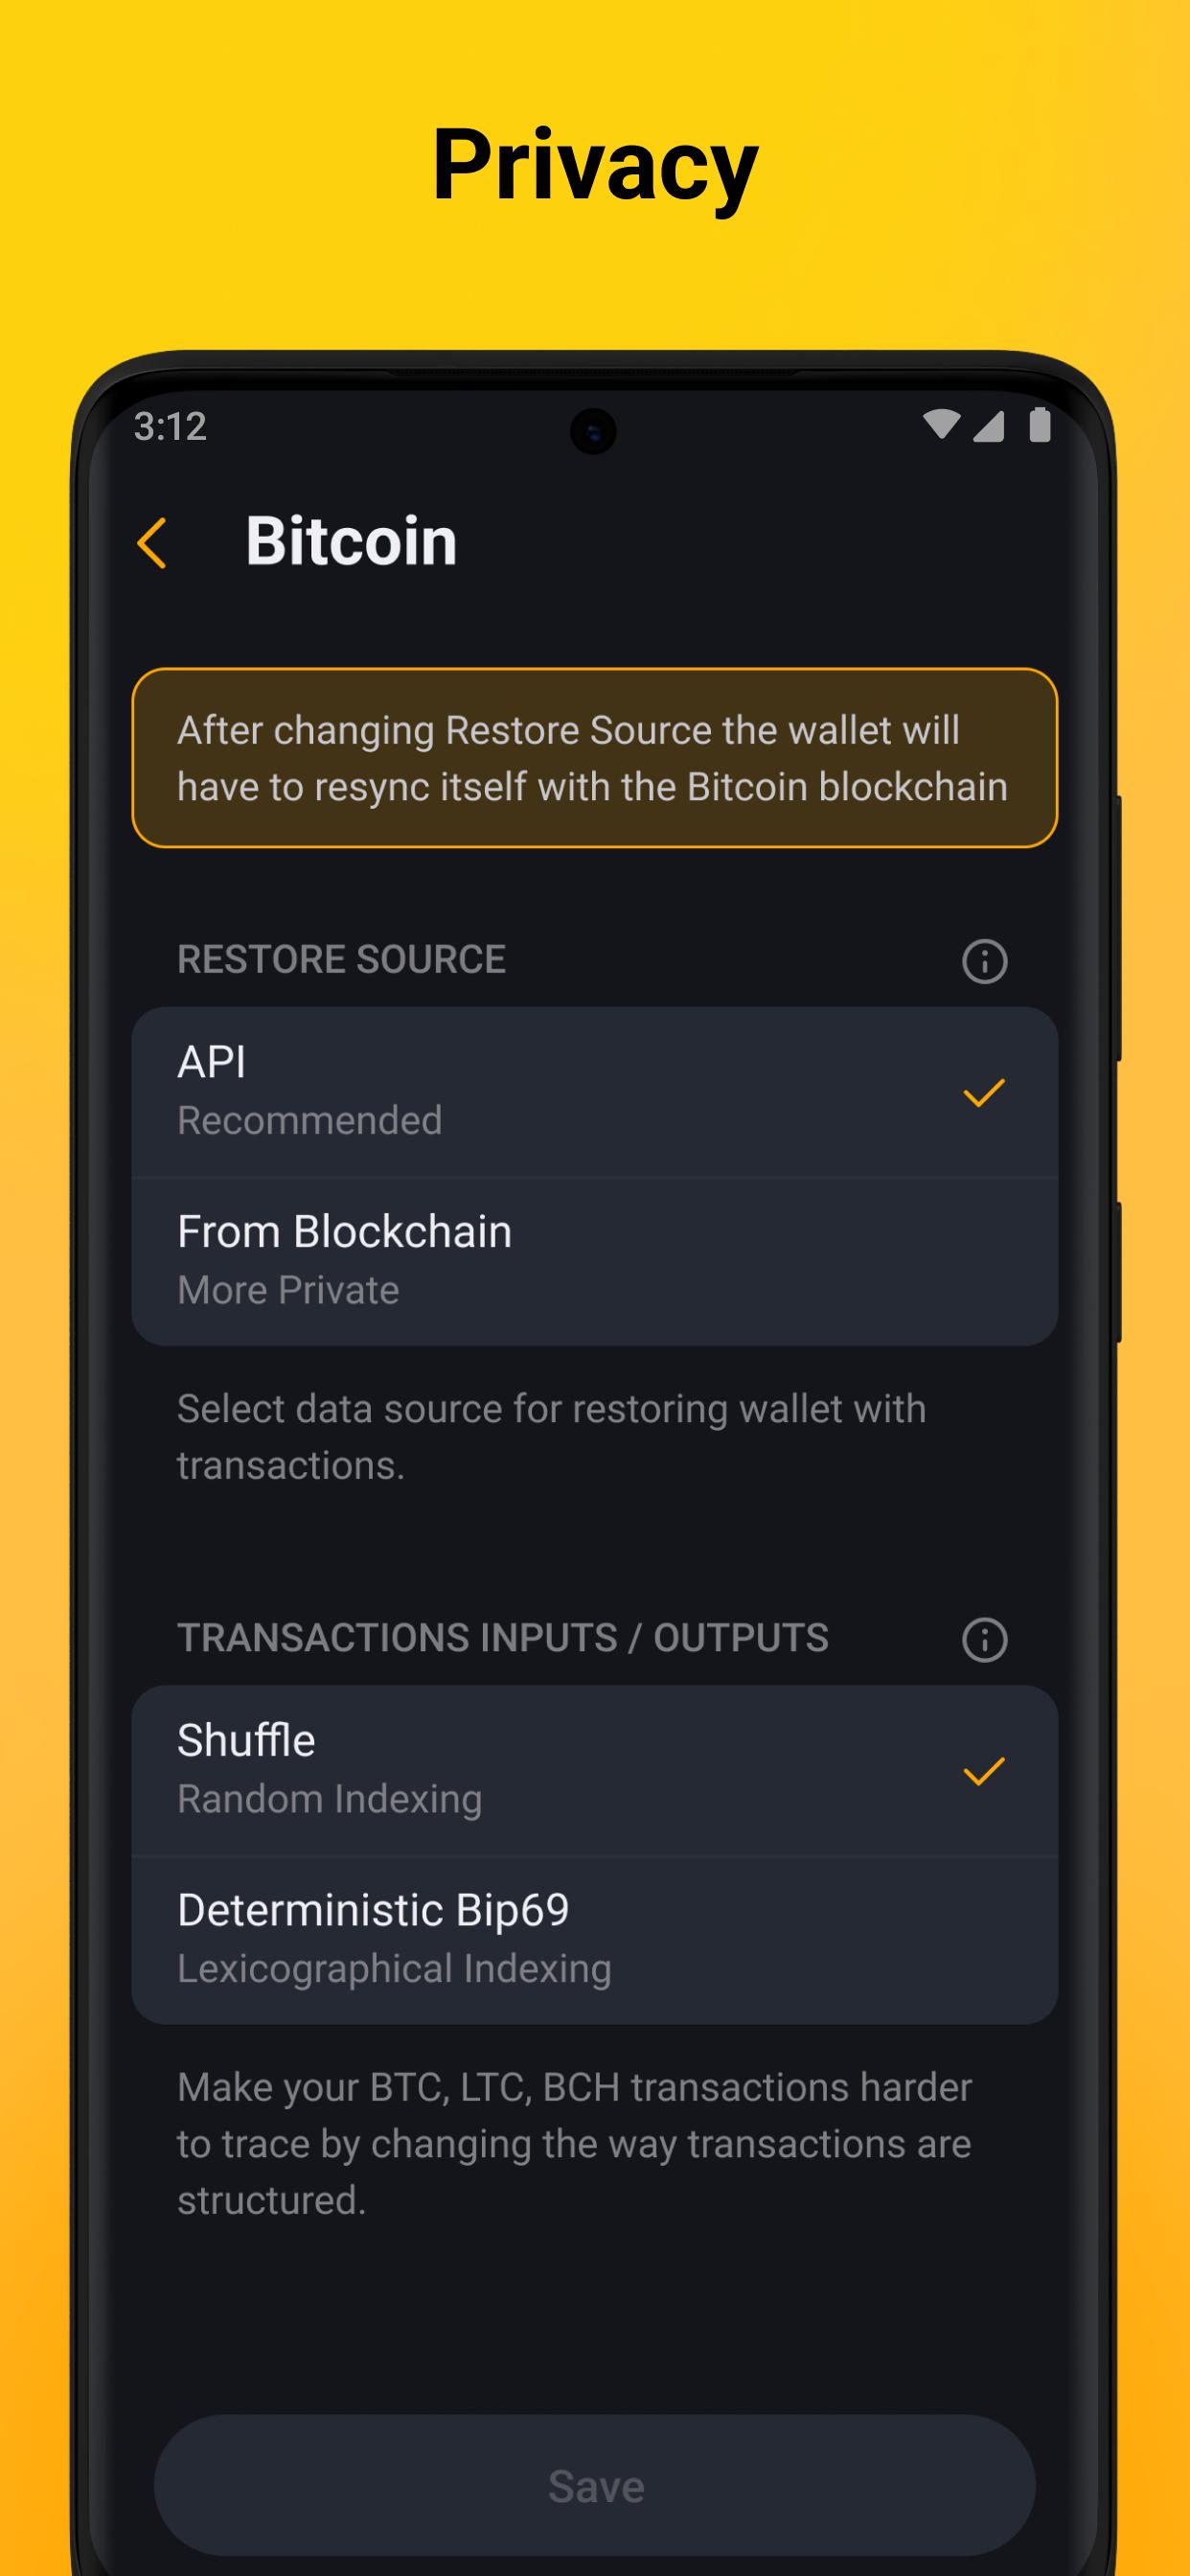 Build and manage your crypto wallet easily